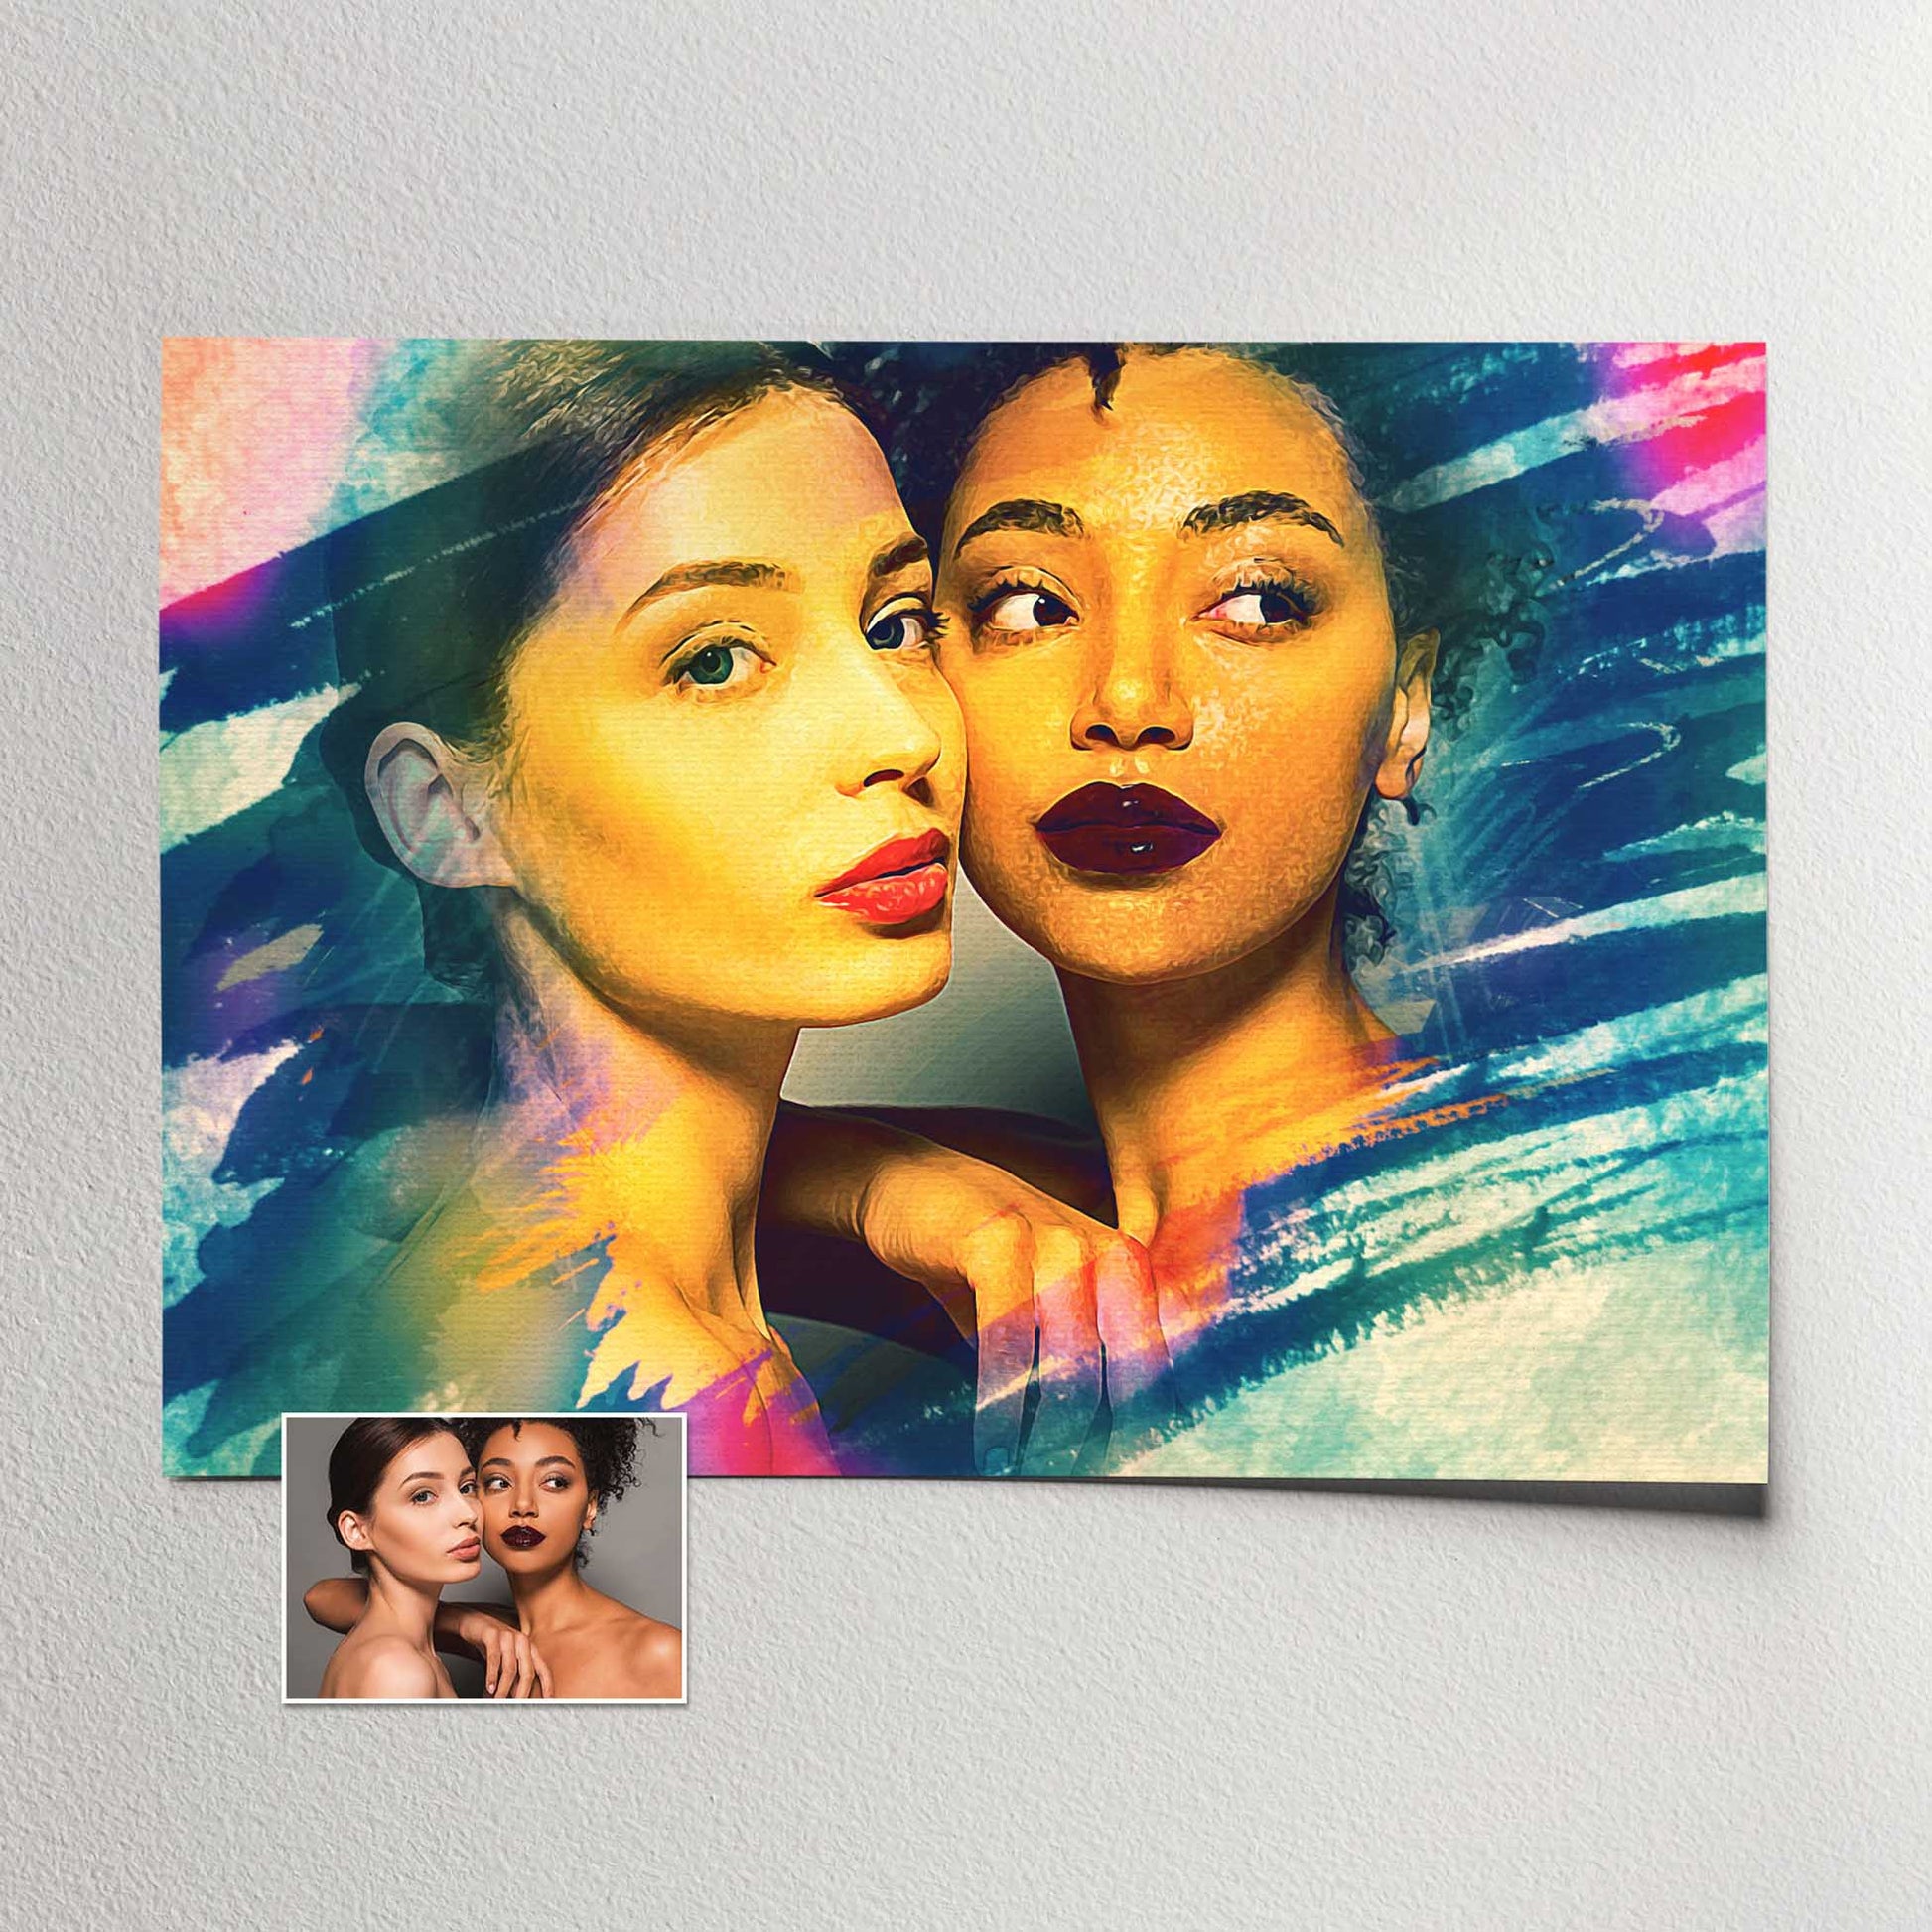 Add a touch of artistry to your space with a Personalised Brush Painting Print, showcasing a watercolor style and mesmerizing brushstroke effect. The stunning purple, pink, and blue hues create a trendy and cool vibe